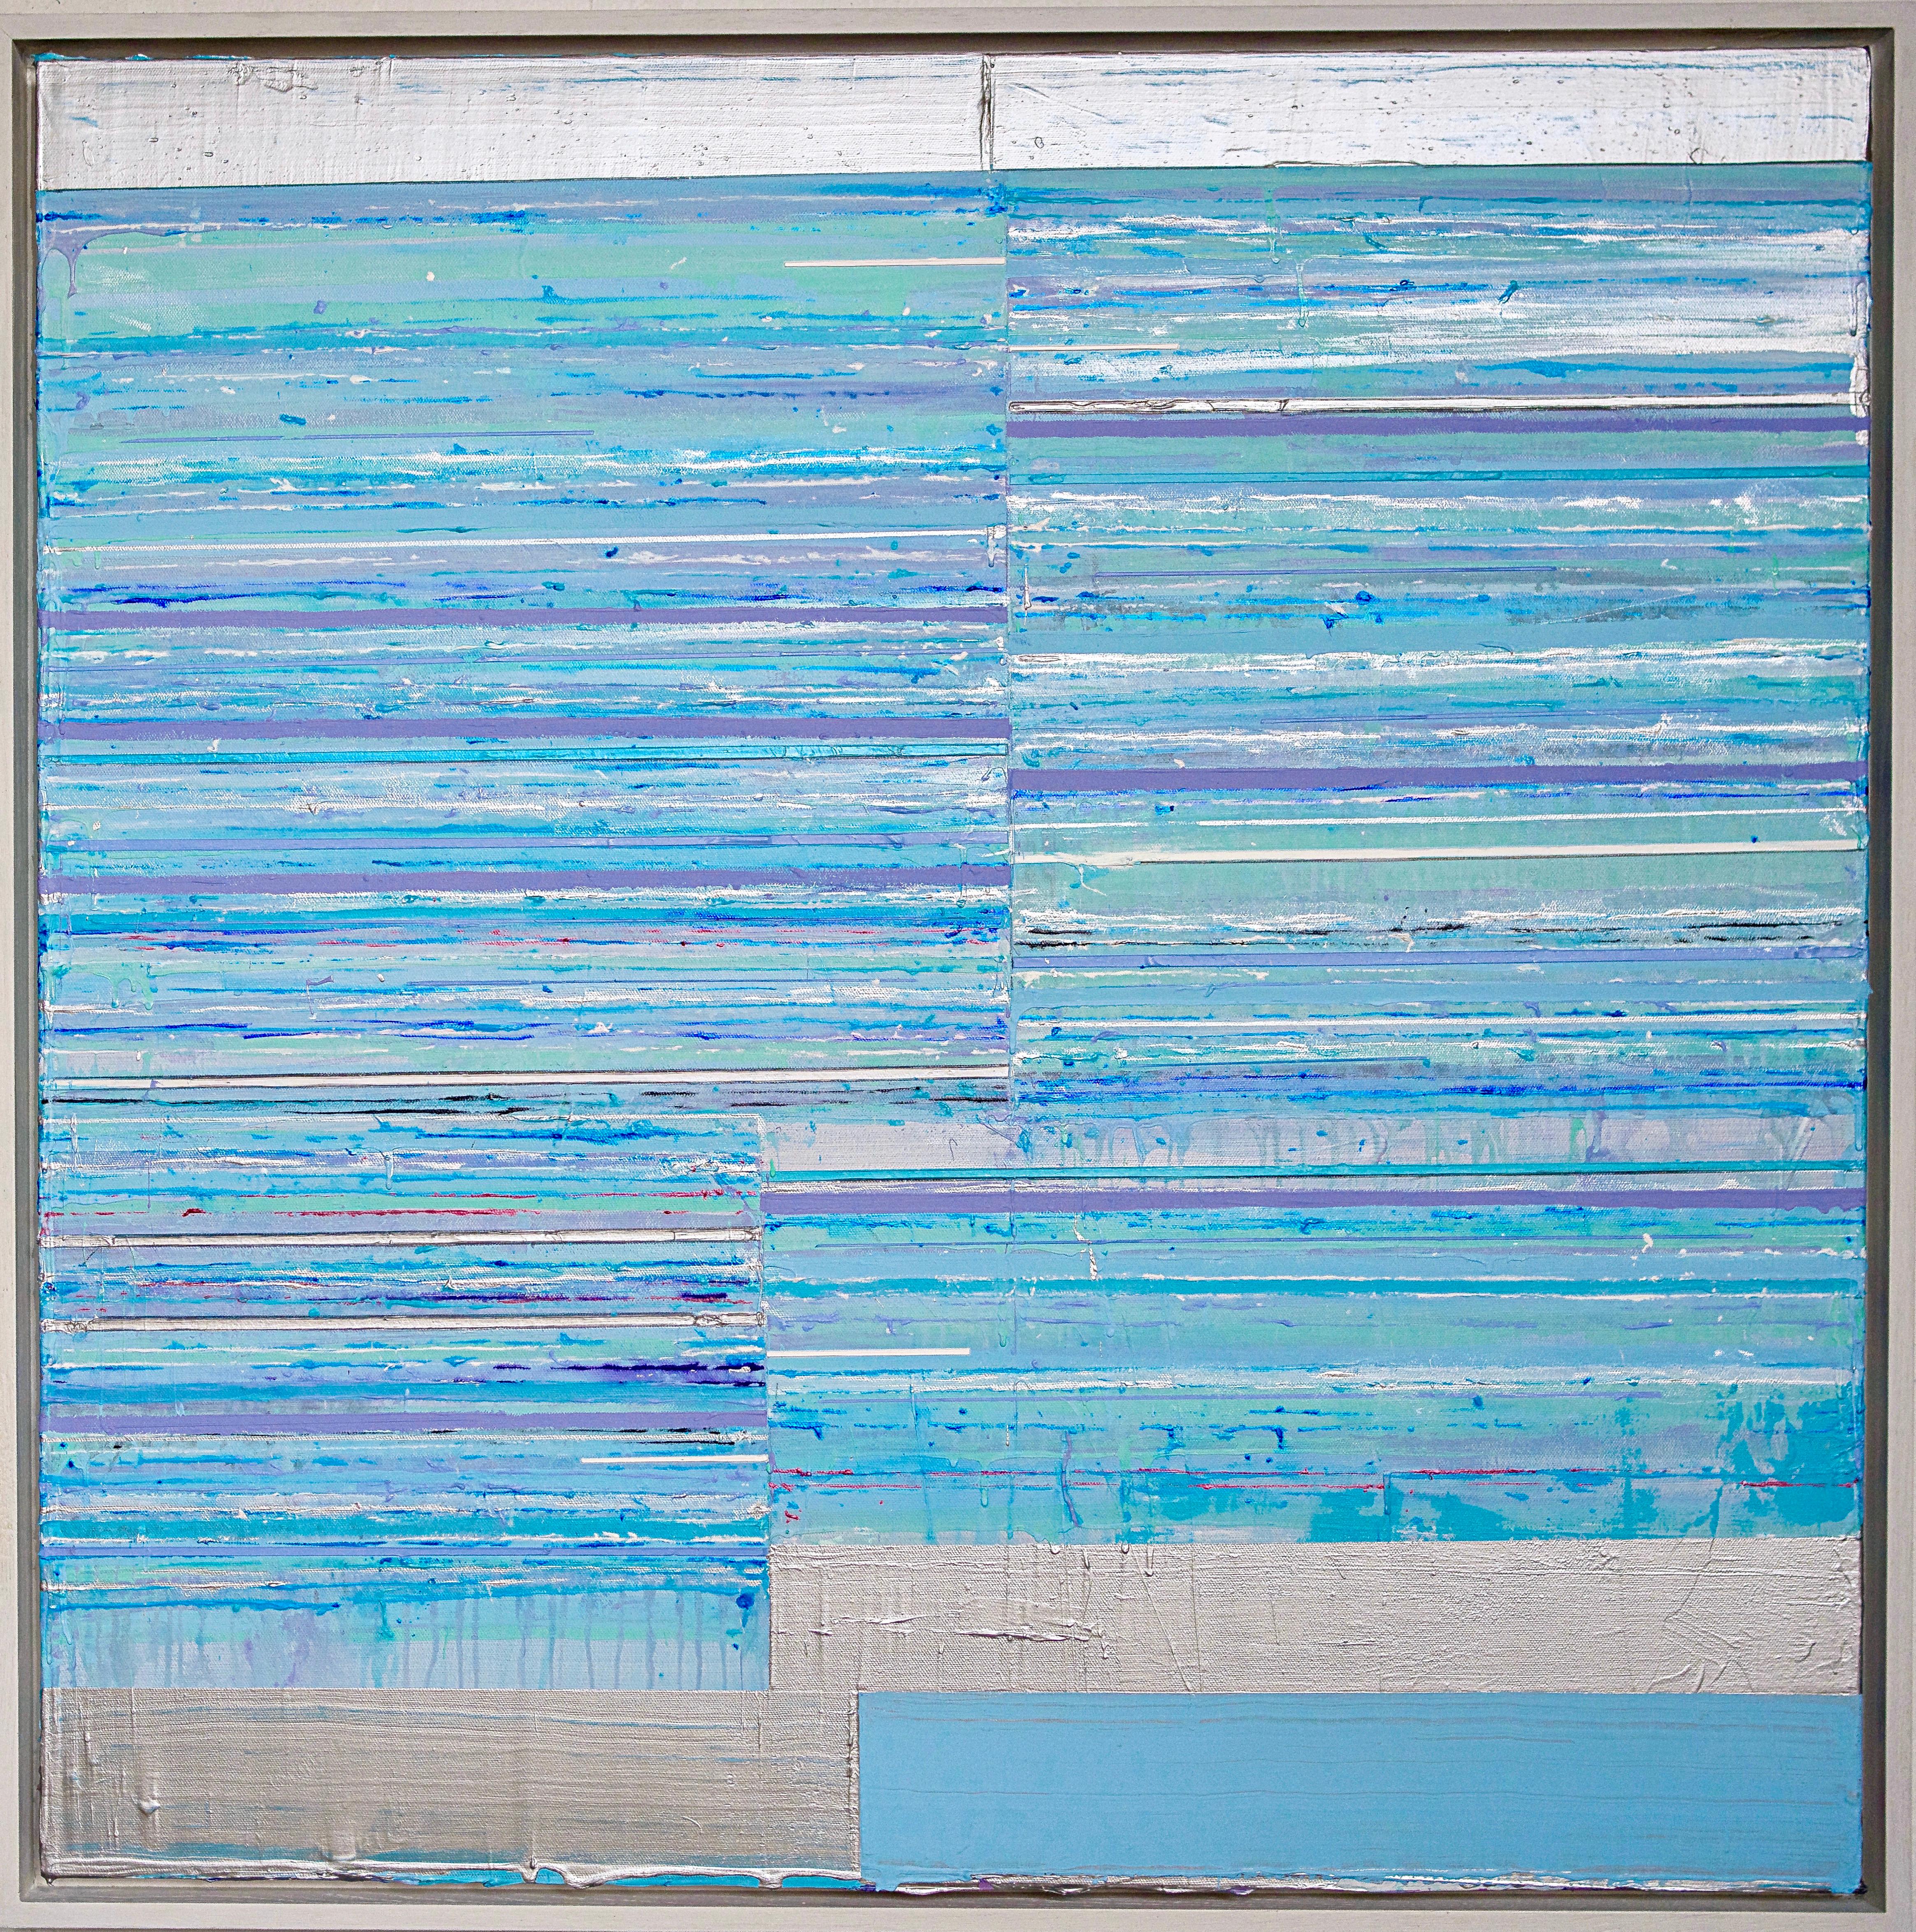 Mark Zimmermann Abstract Painting - Aequor Infinitum - Blue, turquoise, white and silver striped abstract painting